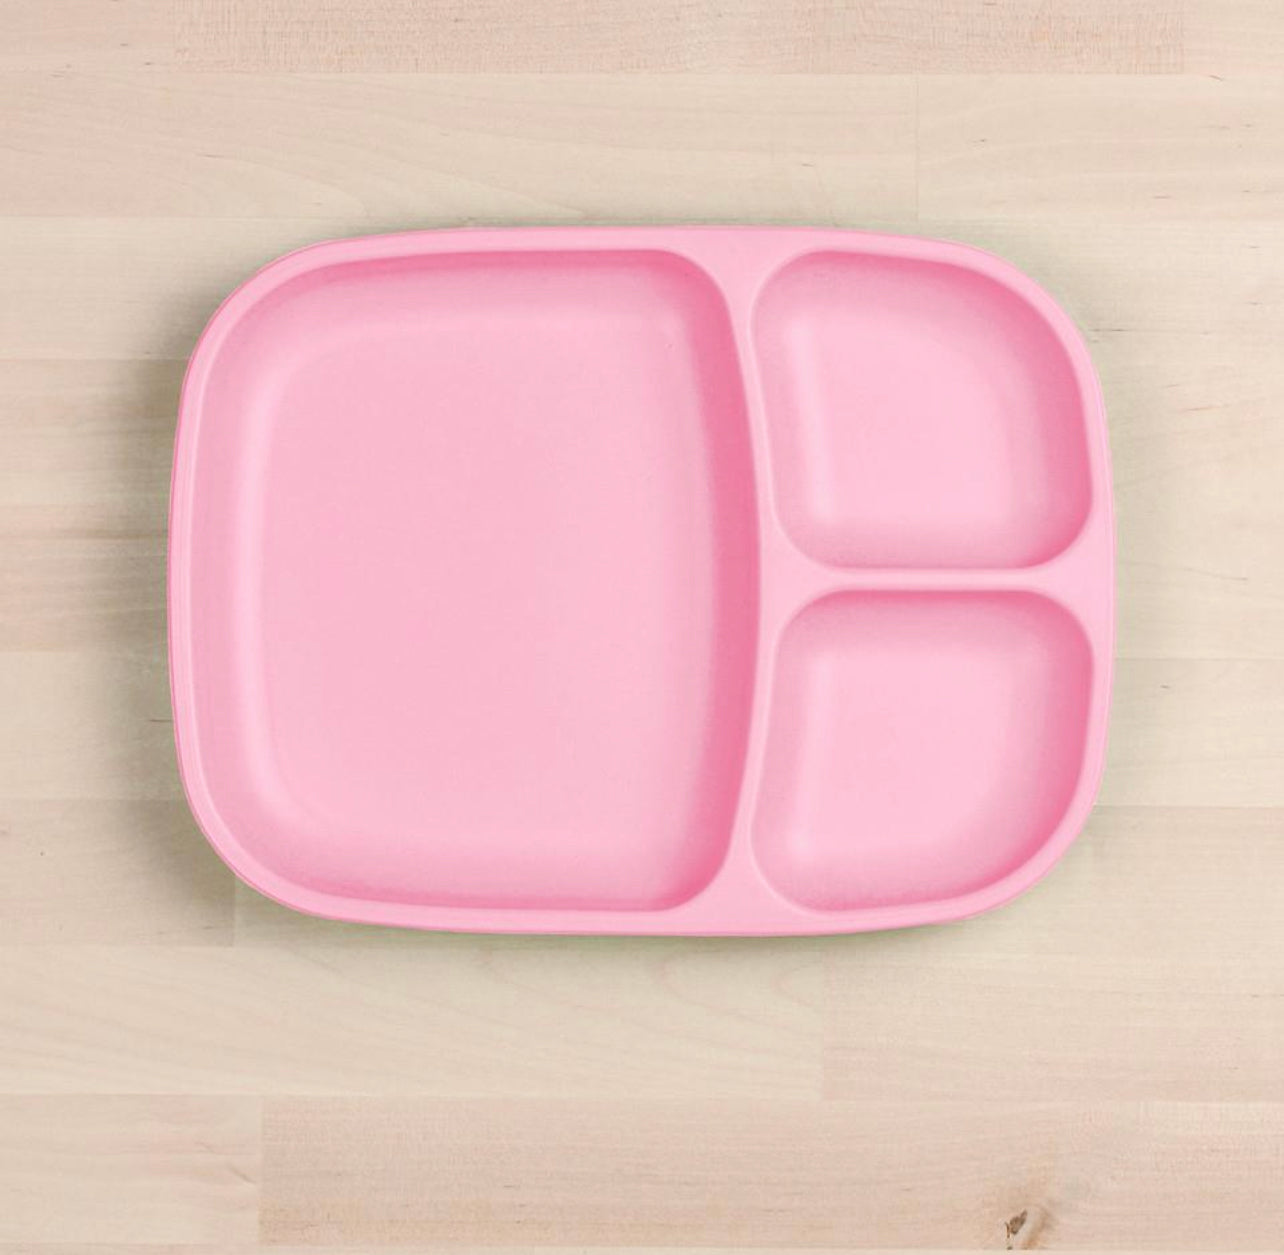 Re-Play Divided Tray - Baby Pink